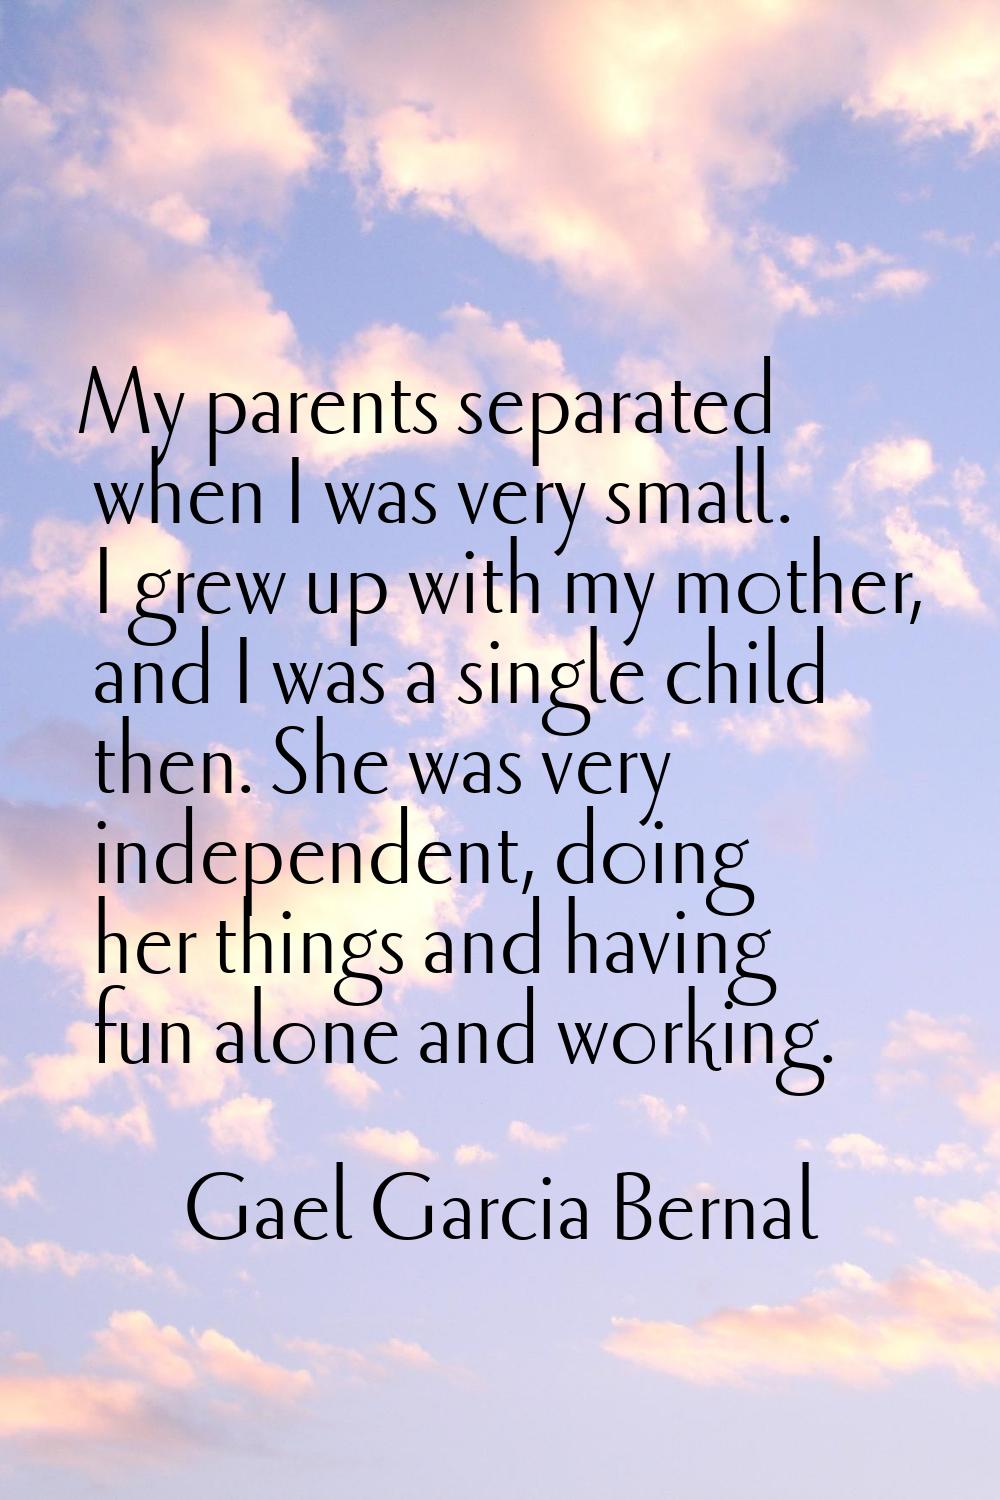 My parents separated when I was very small. I grew up with my mother, and I was a single child then